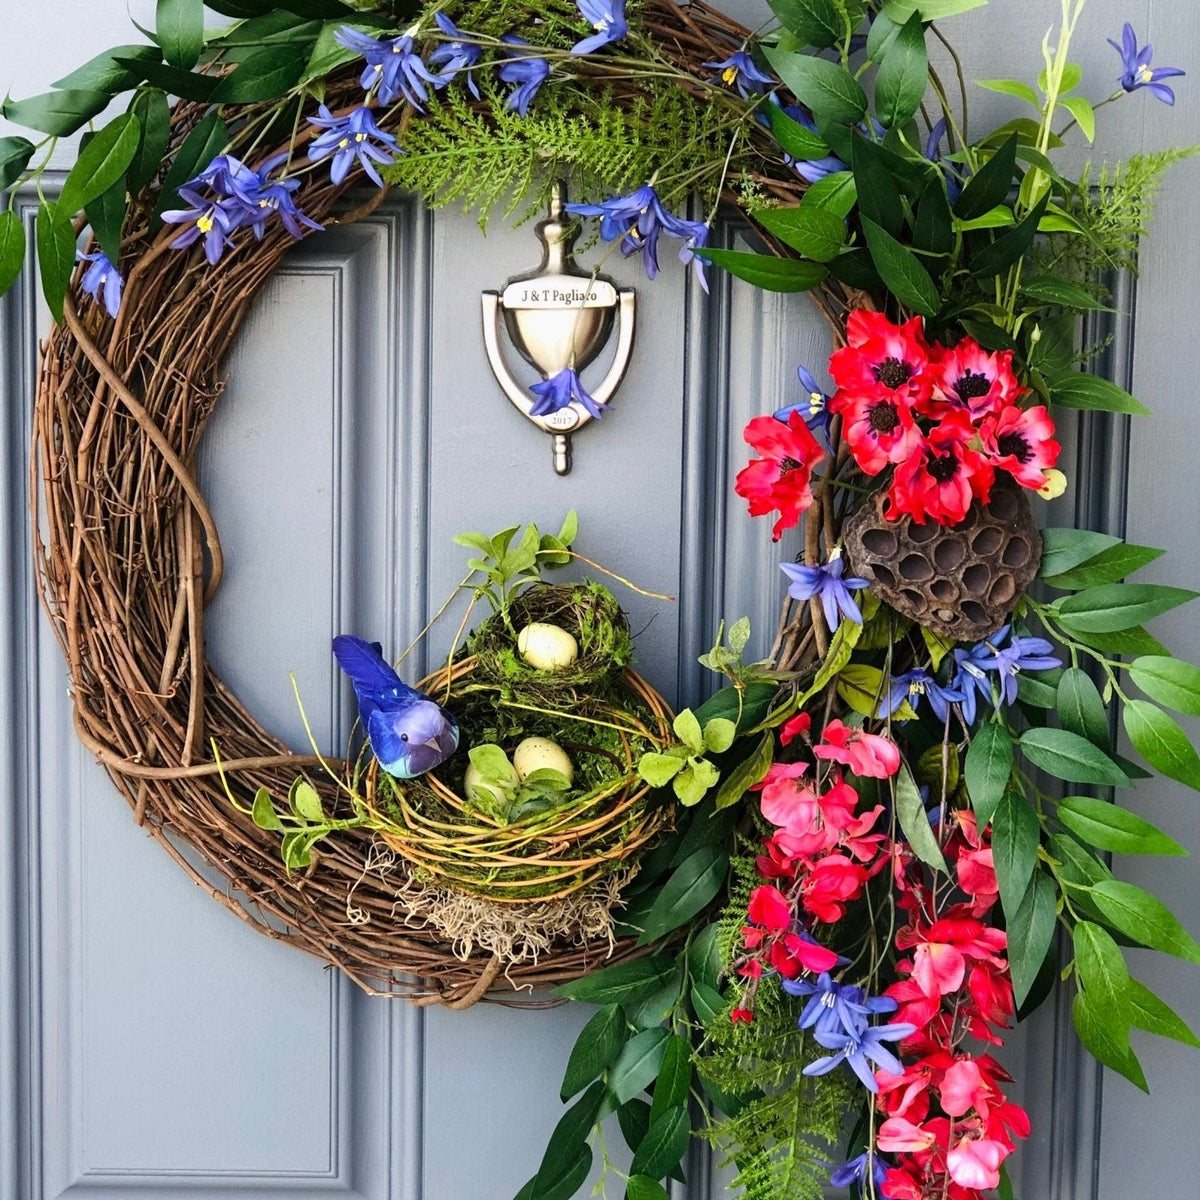 Bird Lover's Wreath, Deep Red and Brilliant Blues with two Nests and Lush Greenery. 20 inch diameter.